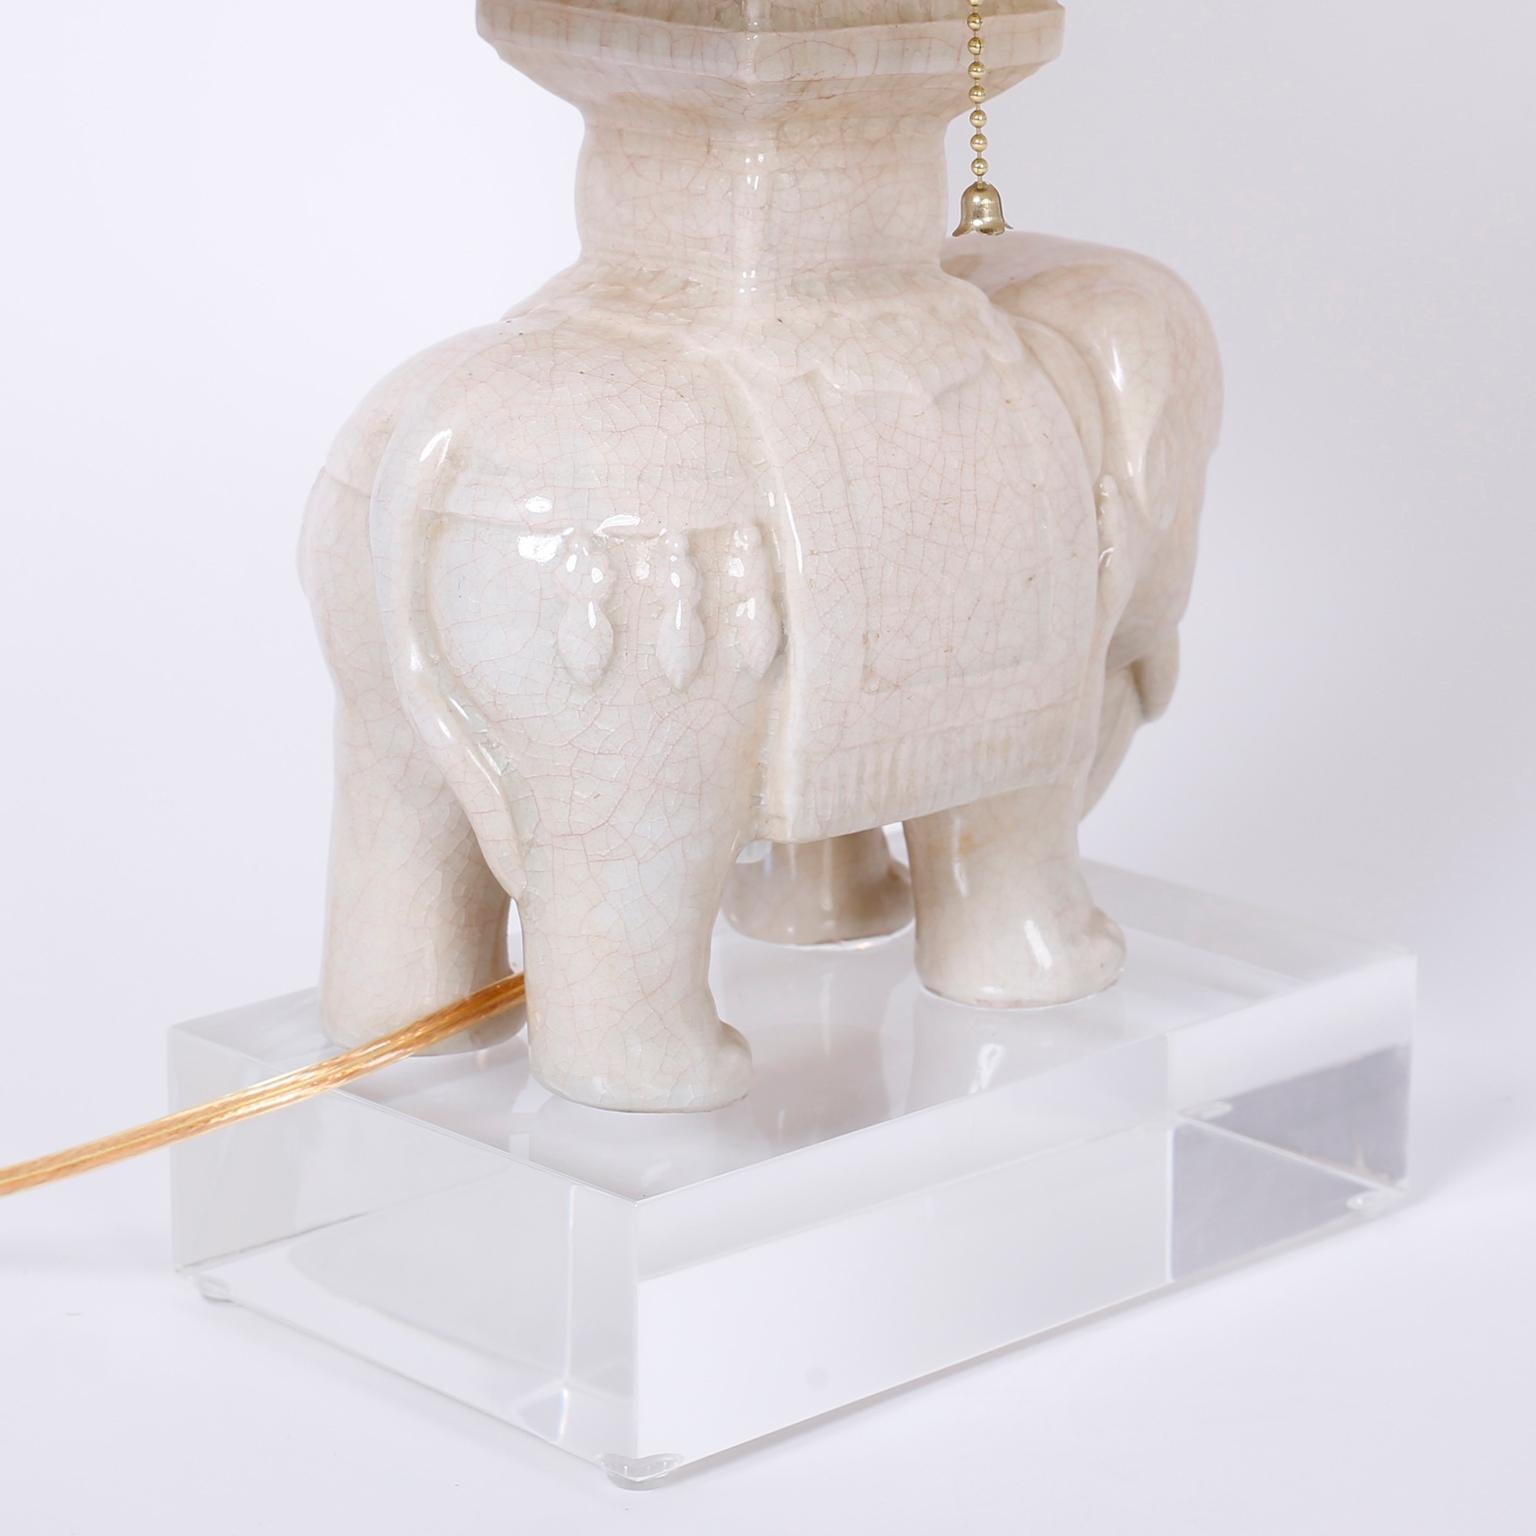 Pair of Midcentury Porcelain Elephant Table Lamps 1